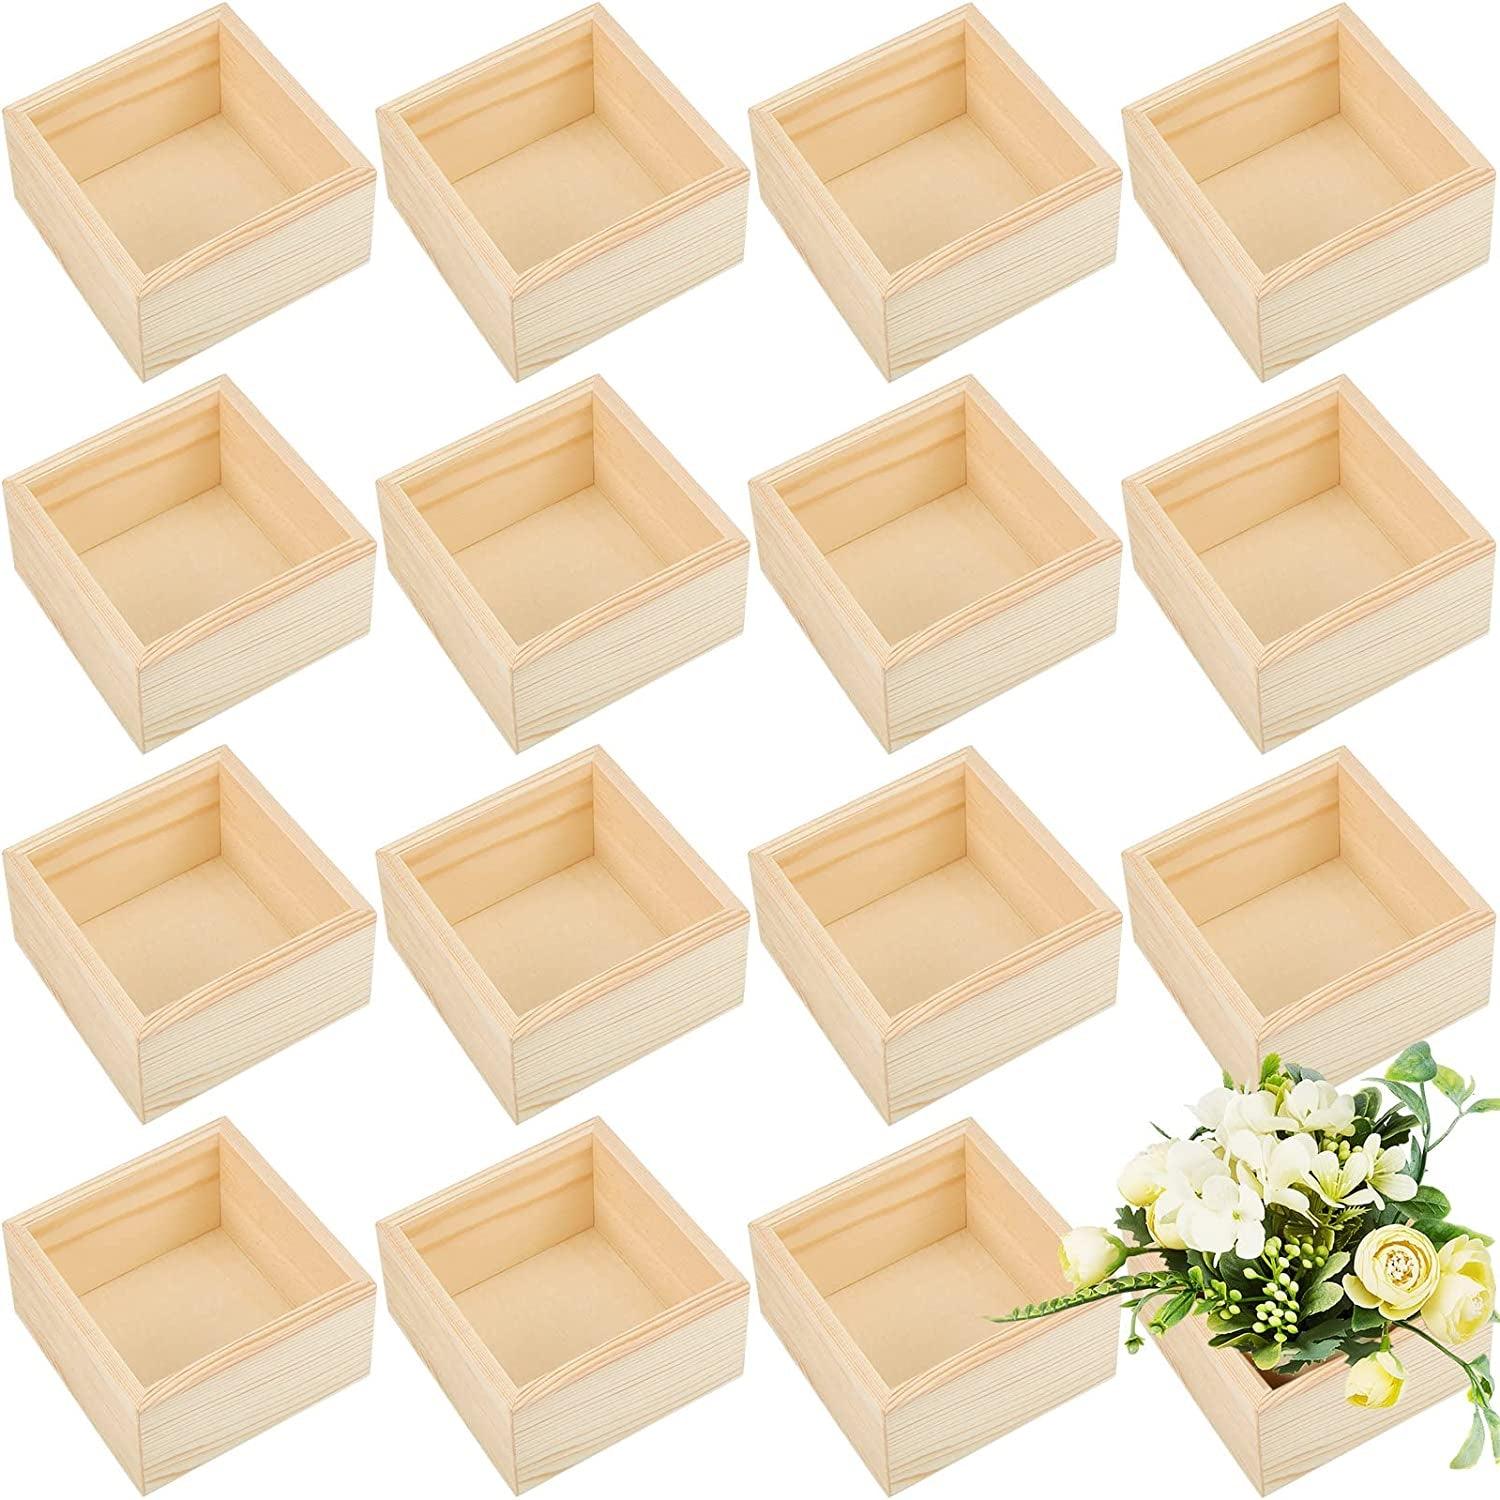 Wooden Boxes Rustic Unfinished Square Wood Box Crates for Decoration Arts Crafts Storage Organizers Planter 4 X 4 Inch (16 Pcs) - WoodArtSupply